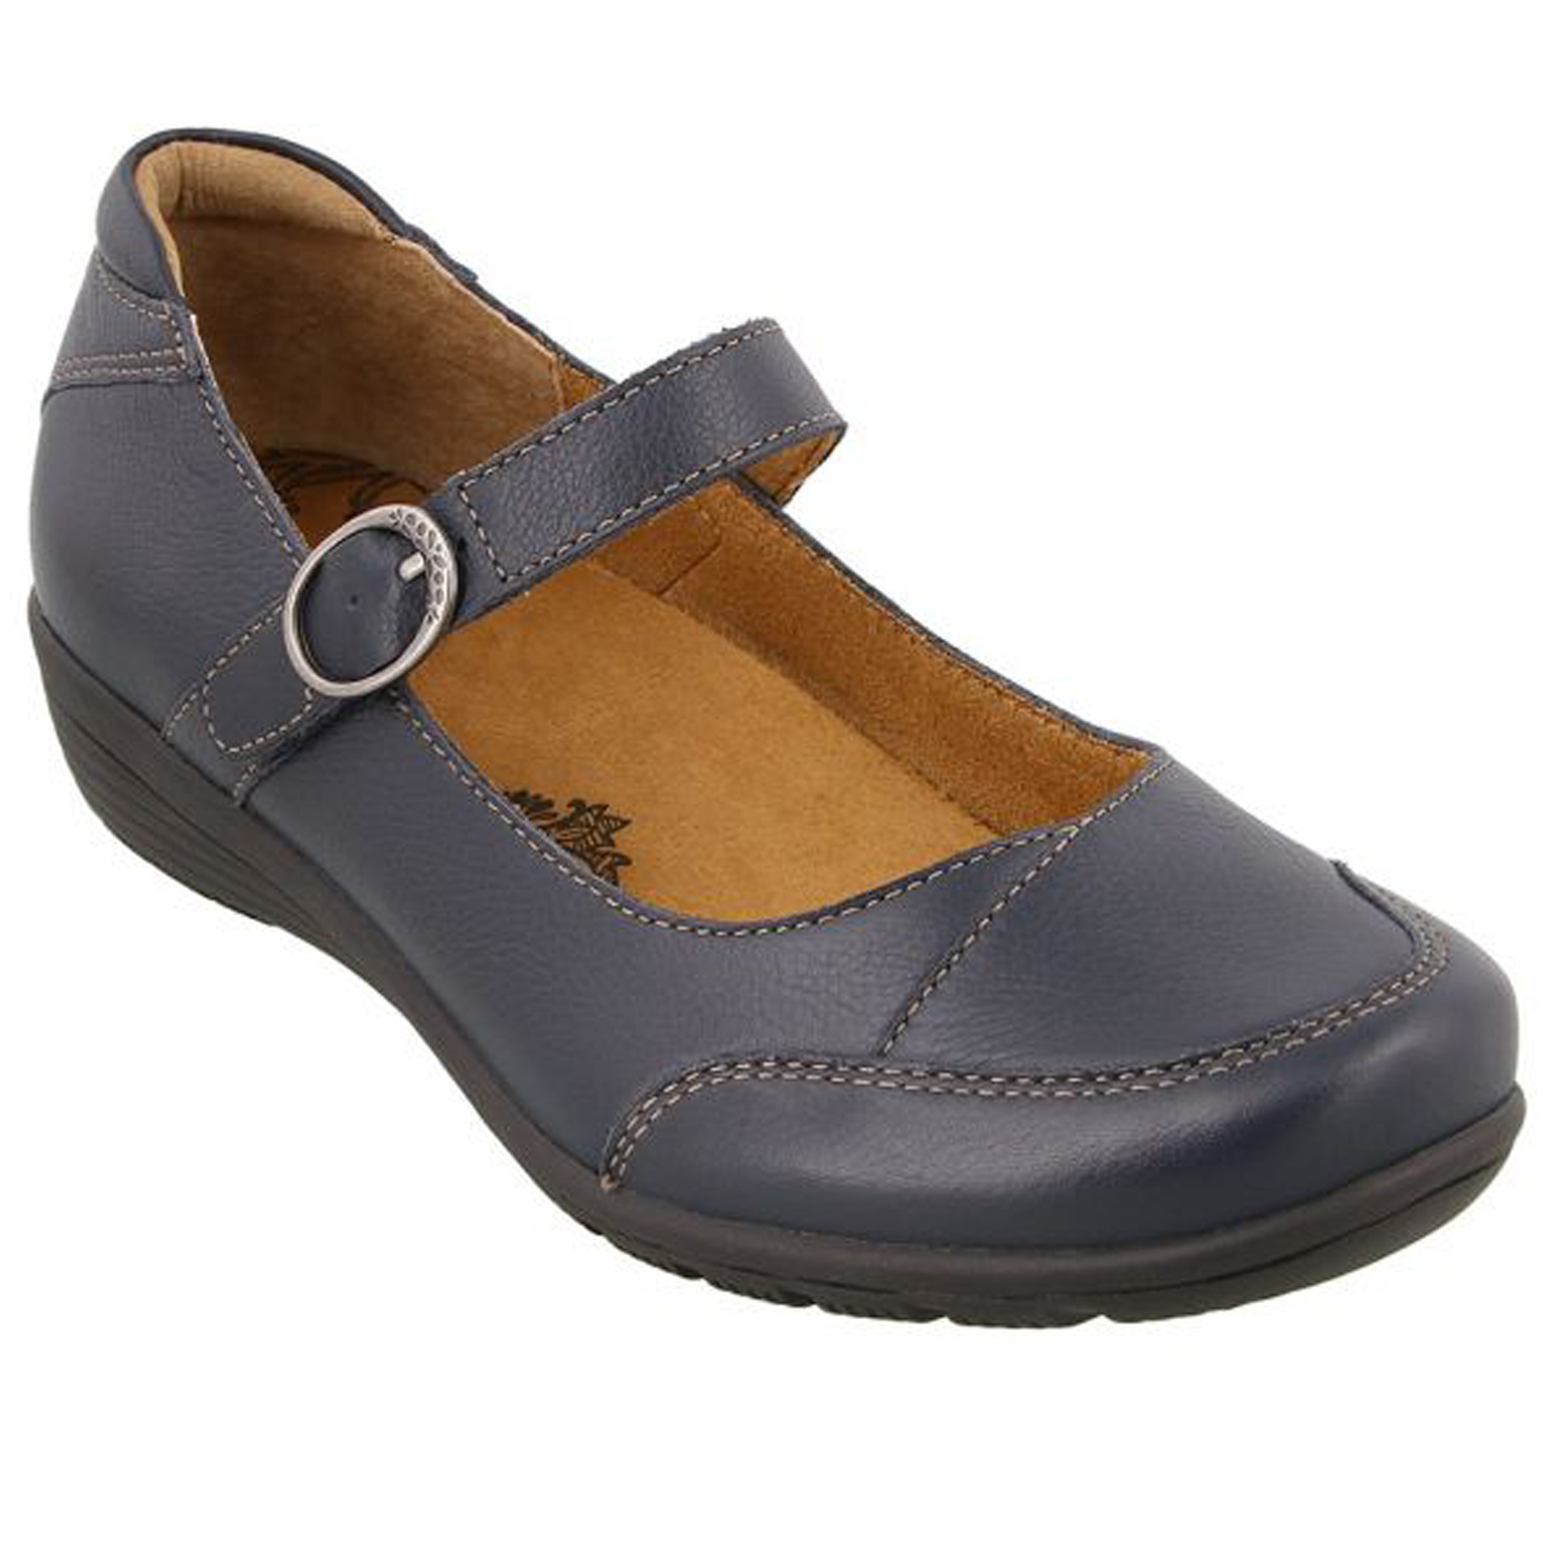 Taos Women's Shoes Navy Leather Laurie's Shoes